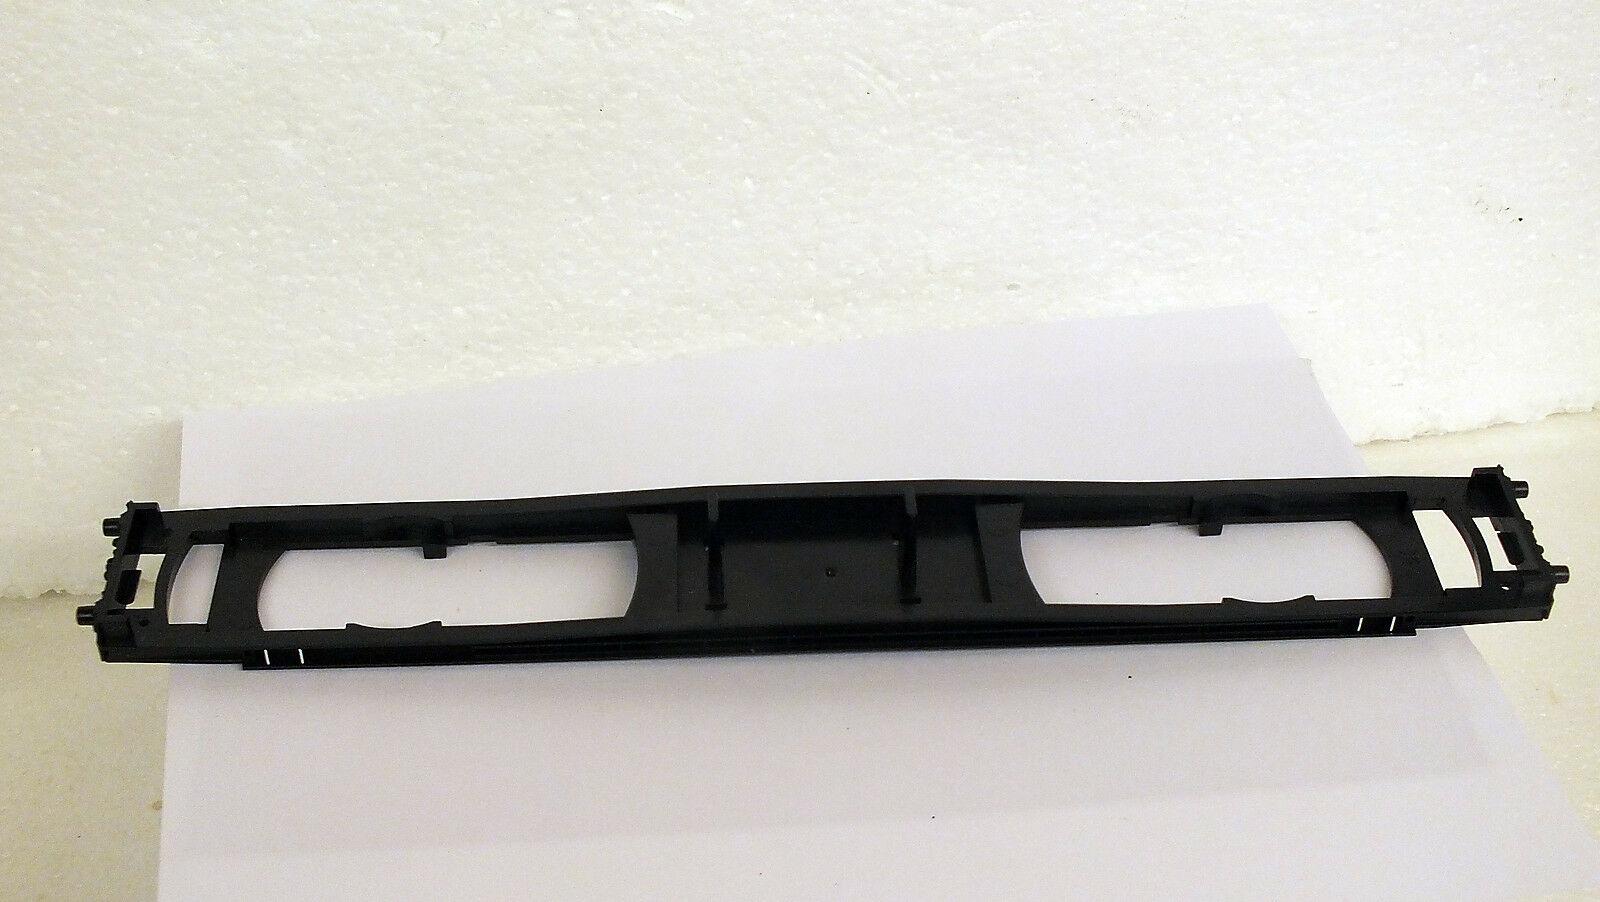 L5629/X9016  HORNBY TRIANG SPARE PARTS  UNDERFRAME CLASS 58  P2B